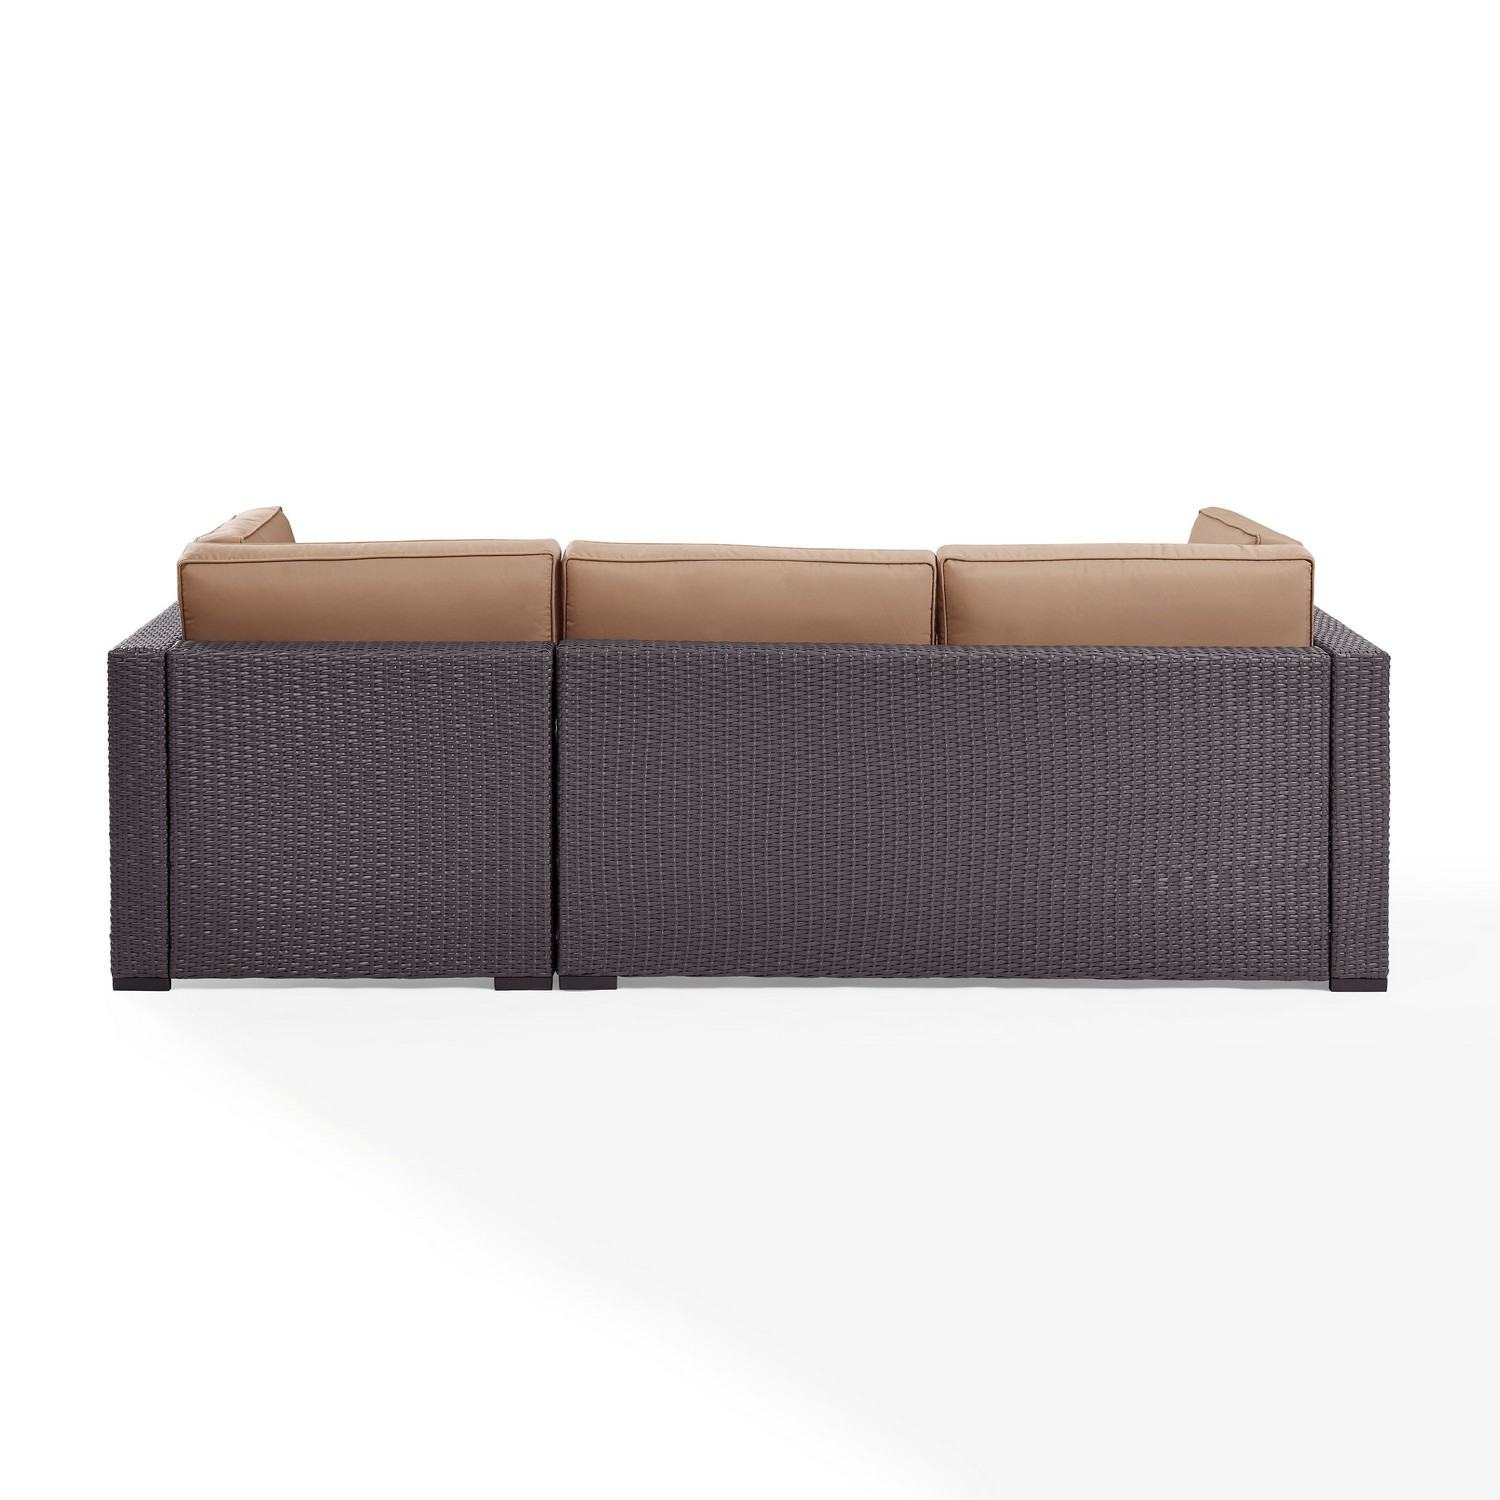 Crosley Biscayne 3-PC Outdoor Wicker Sectional Set - Loveseat, Corner Chair, Coffee Table - Mocha/Brown